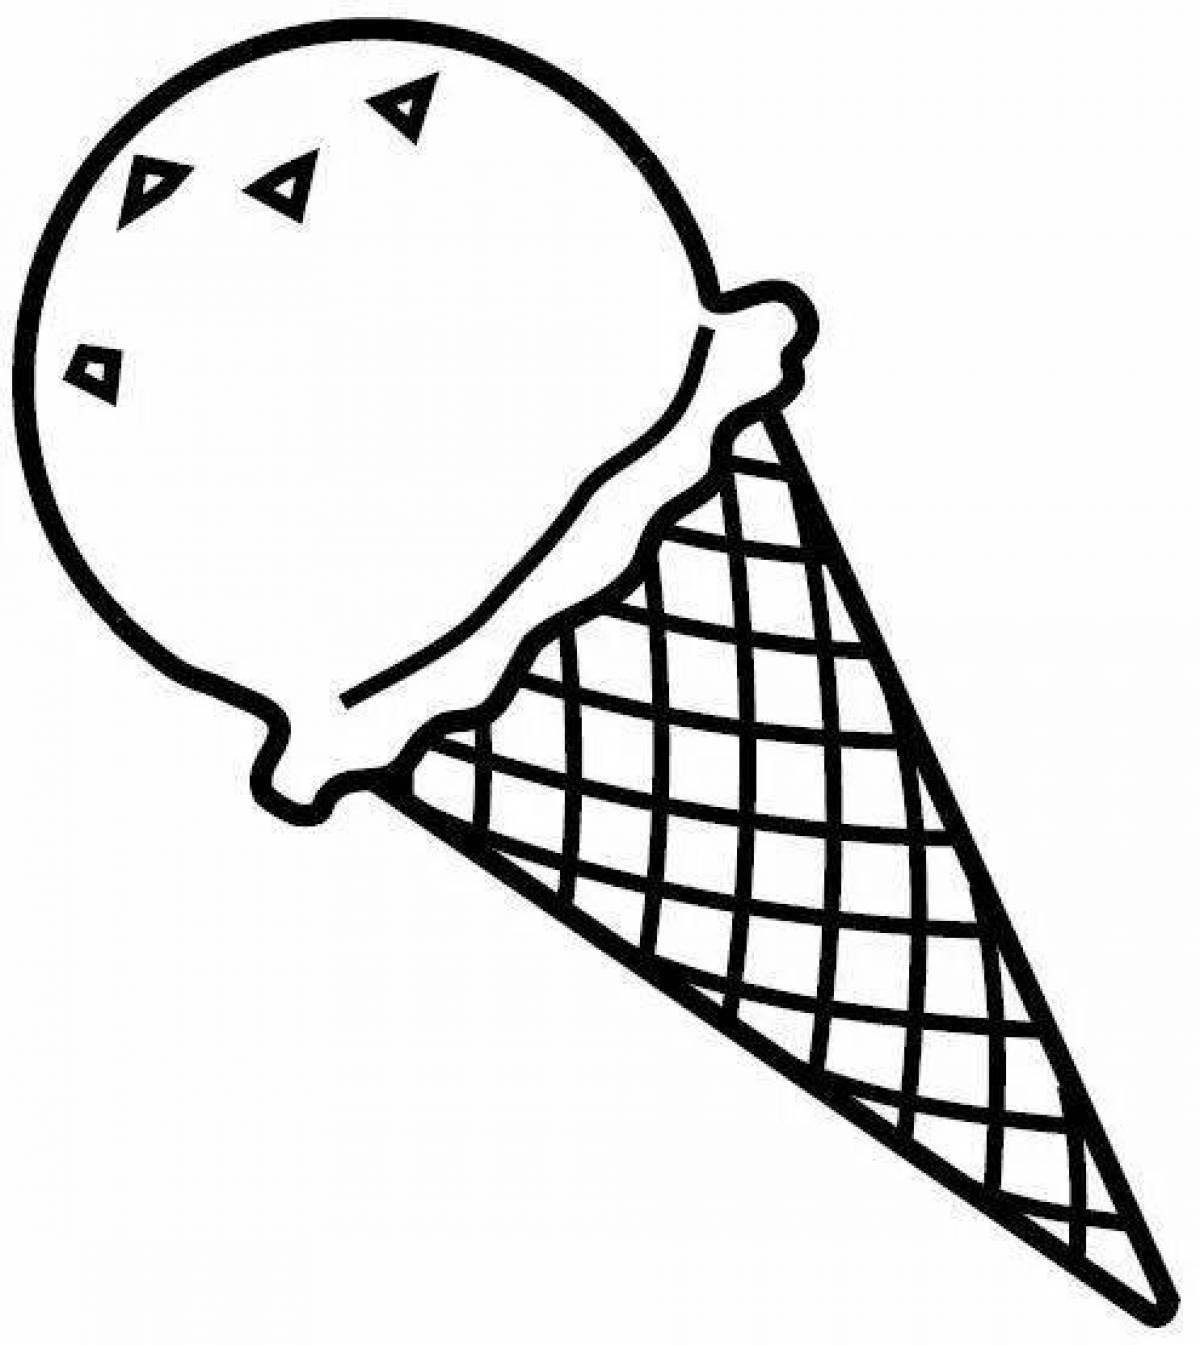 Tempting ice cream cone coloring page